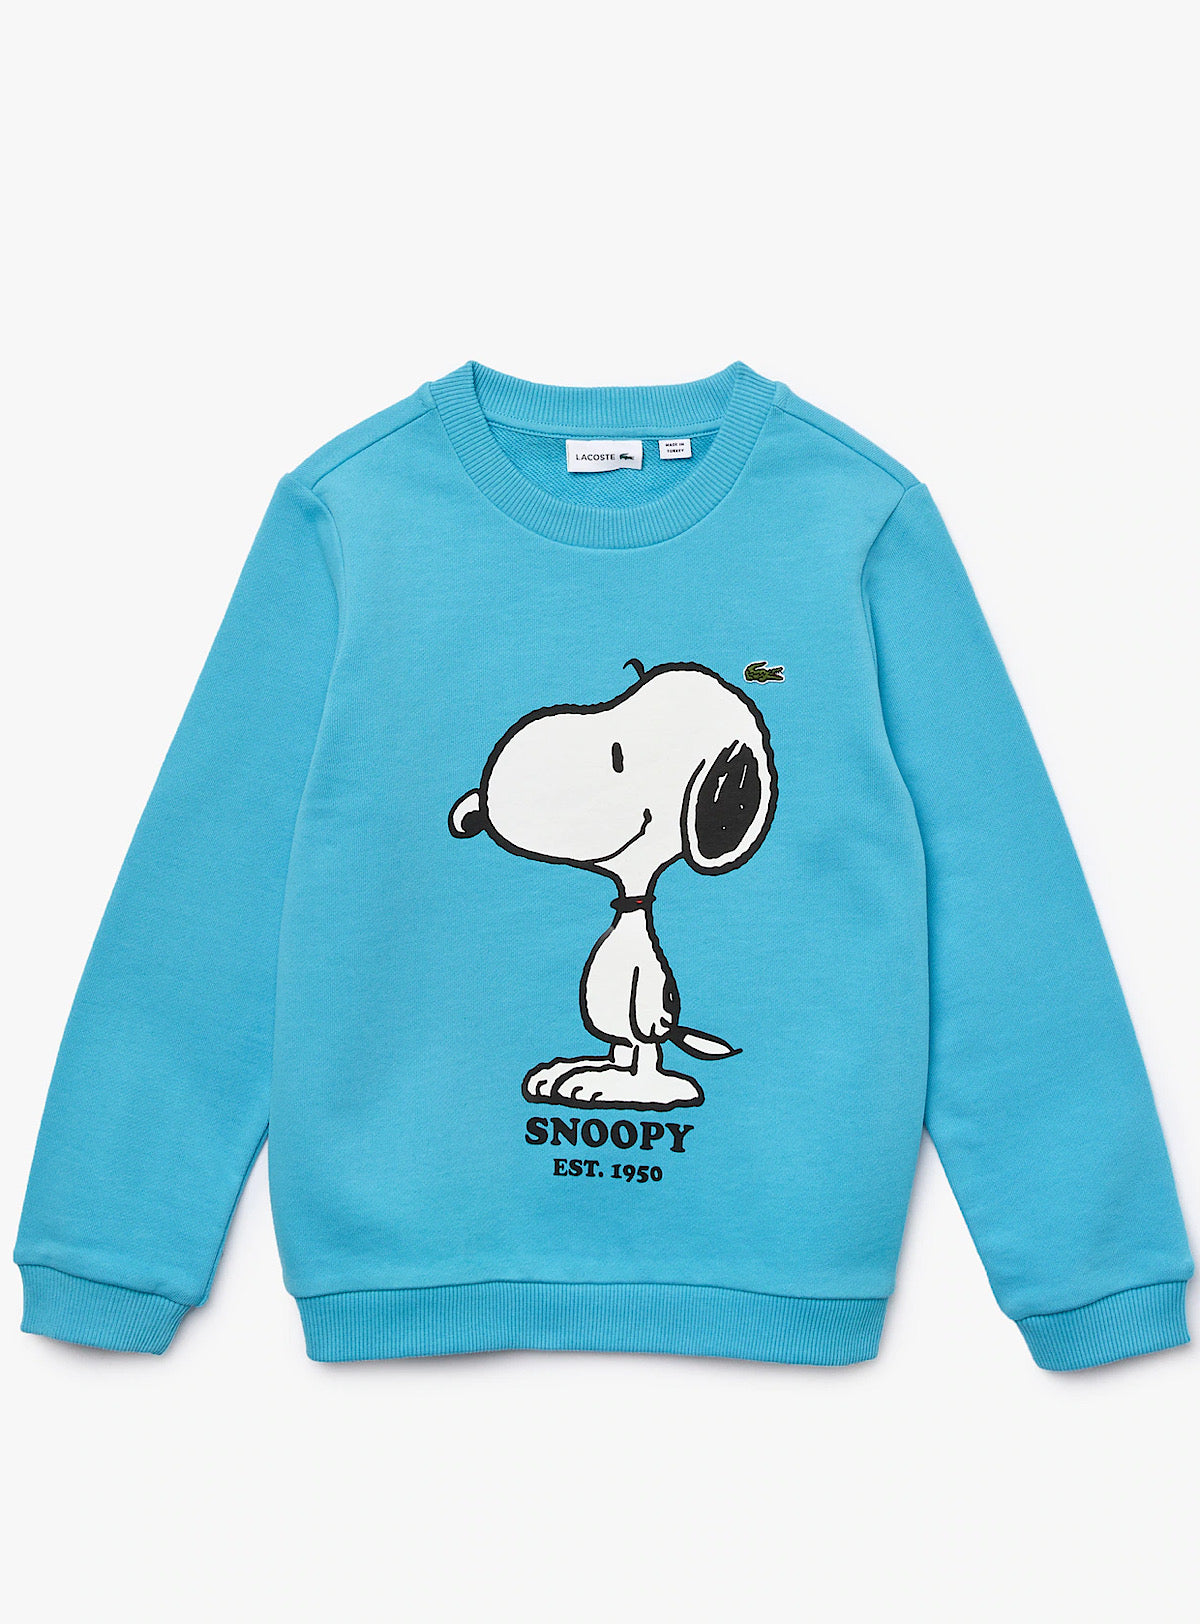 And Vengeance78 - - Snoopy Blue White Sweater SJ7890 – - Lacoste Kids